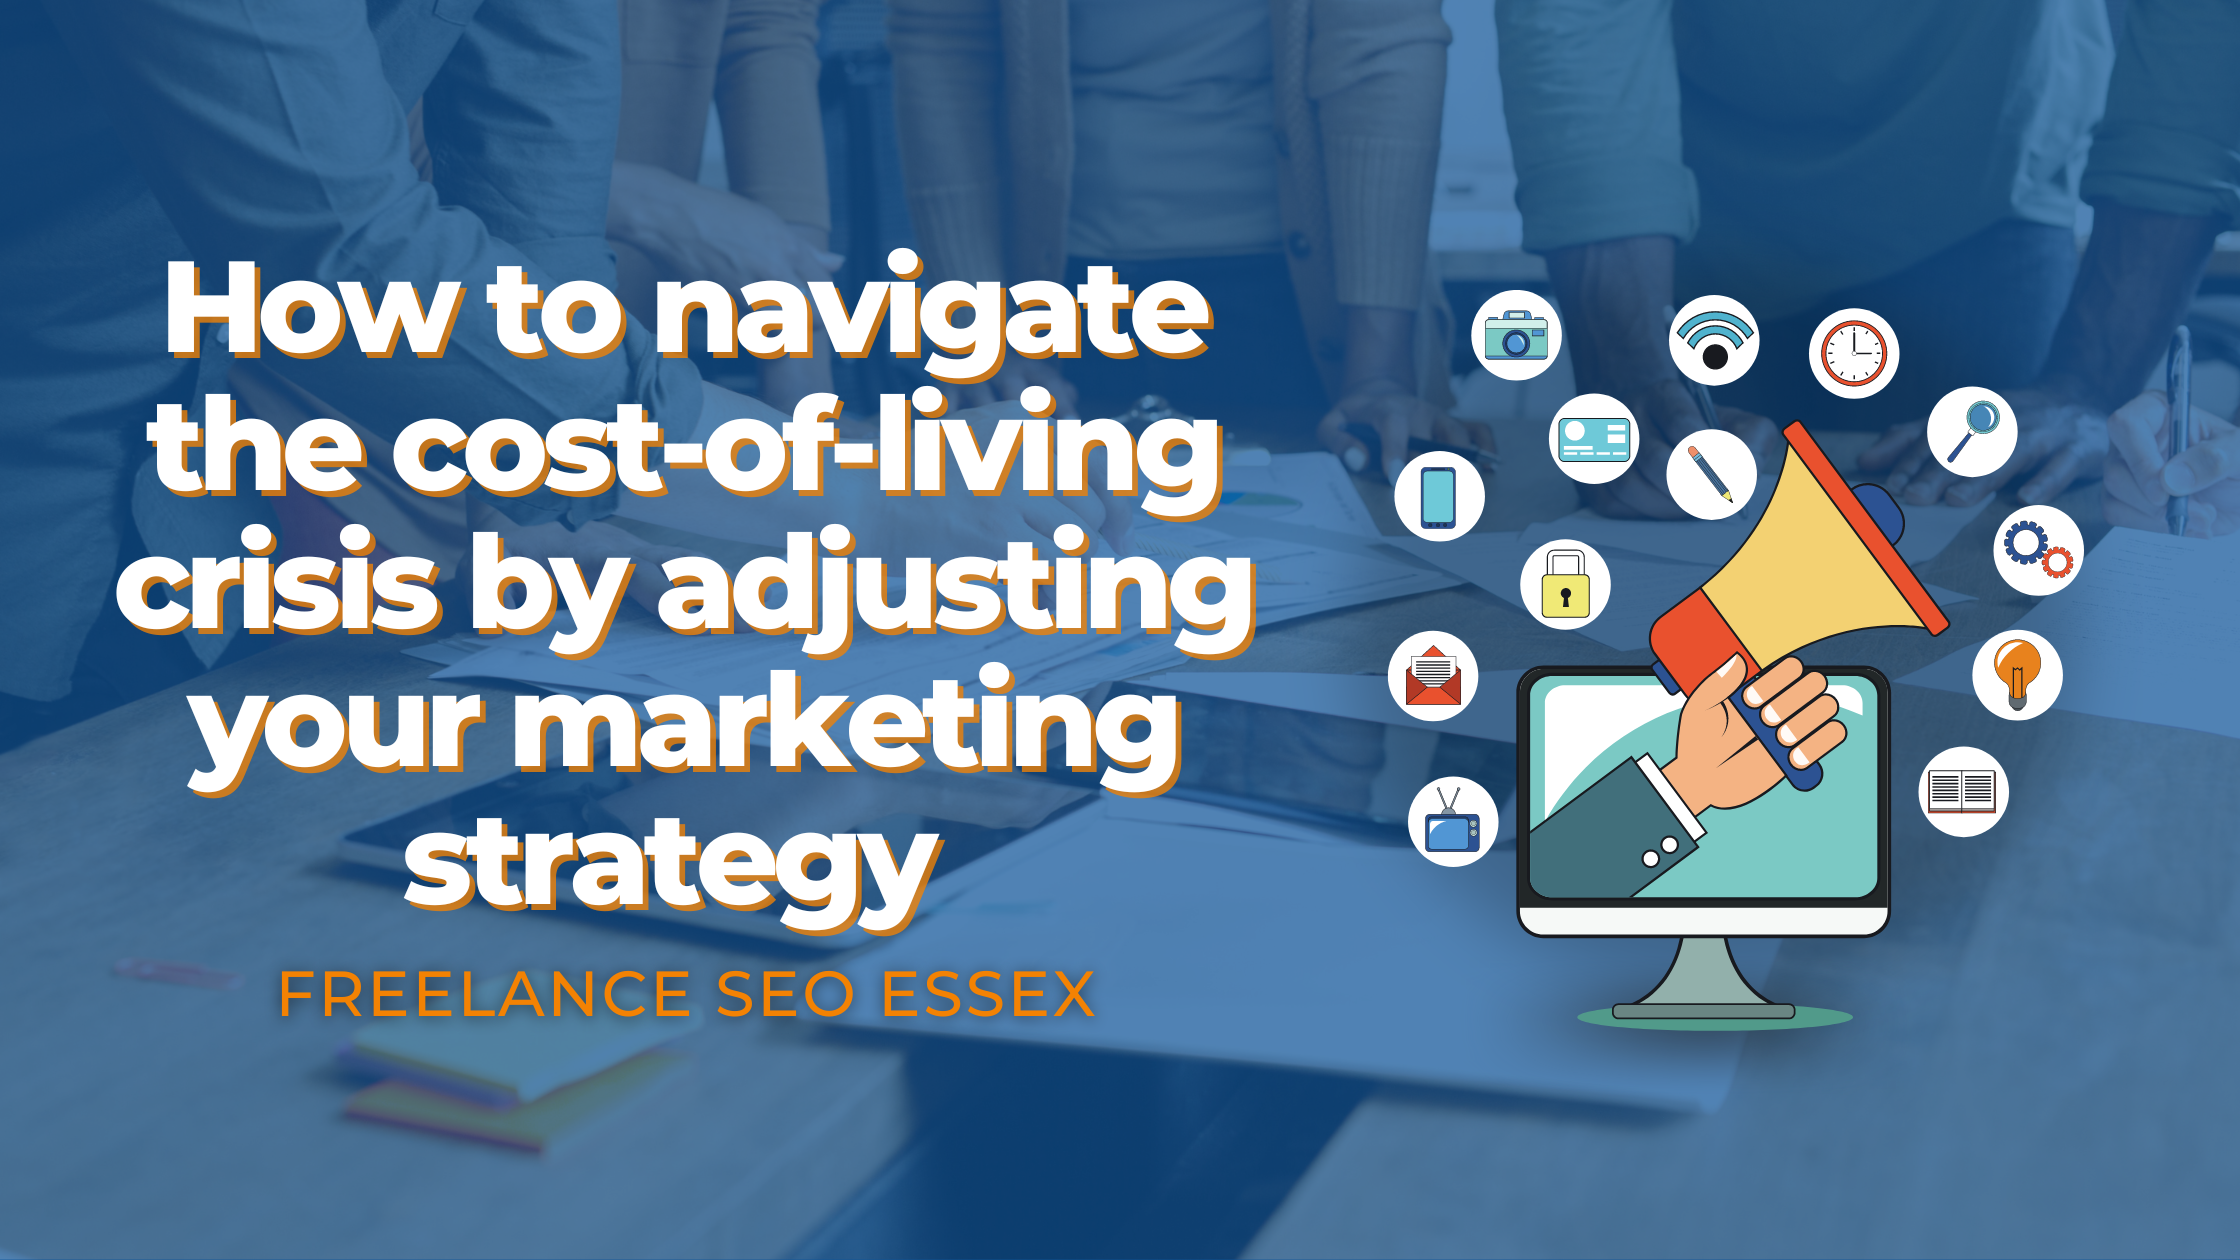 Freelance SEO Essex - How to navigate the cost-of-living crisis by adjusting your marketing strategy